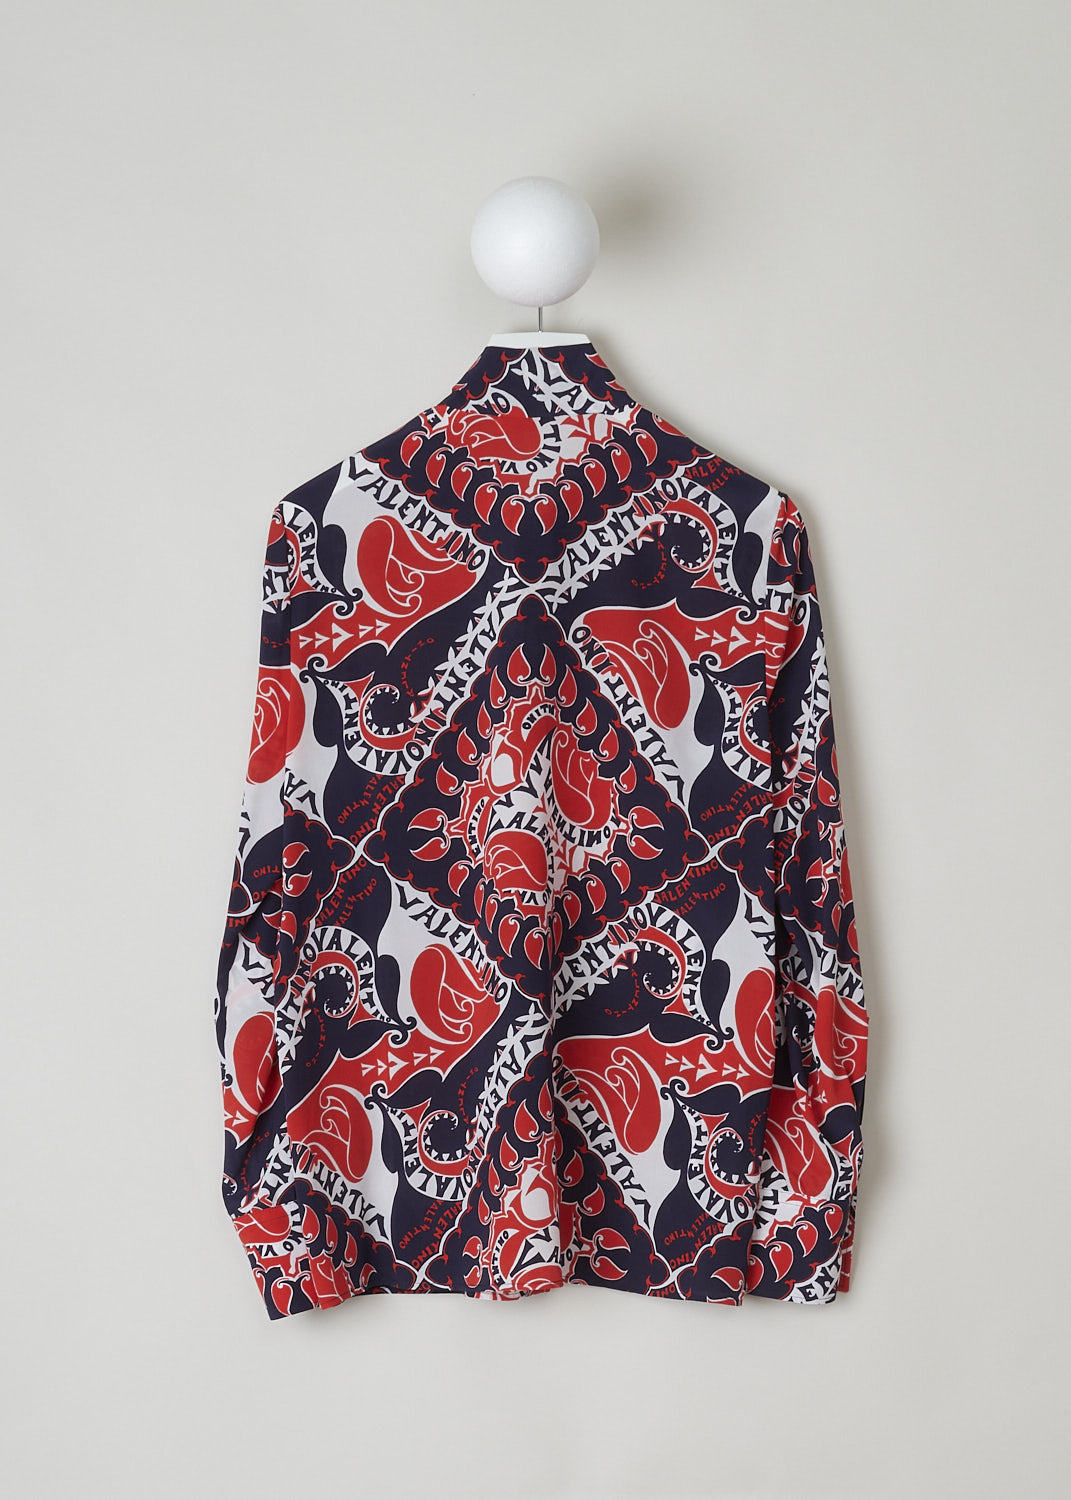 VALENTINO, BOLD PRINTED TIE DETAIL BLOUSE, 1B3AB3Y27AP_01N, Print, Red, Blue, Back, This bold printed silk blouse has a collar with a self tie detail. The blouse has a concealed front button closure and buttoned cuffs. The hemline is straight. 
